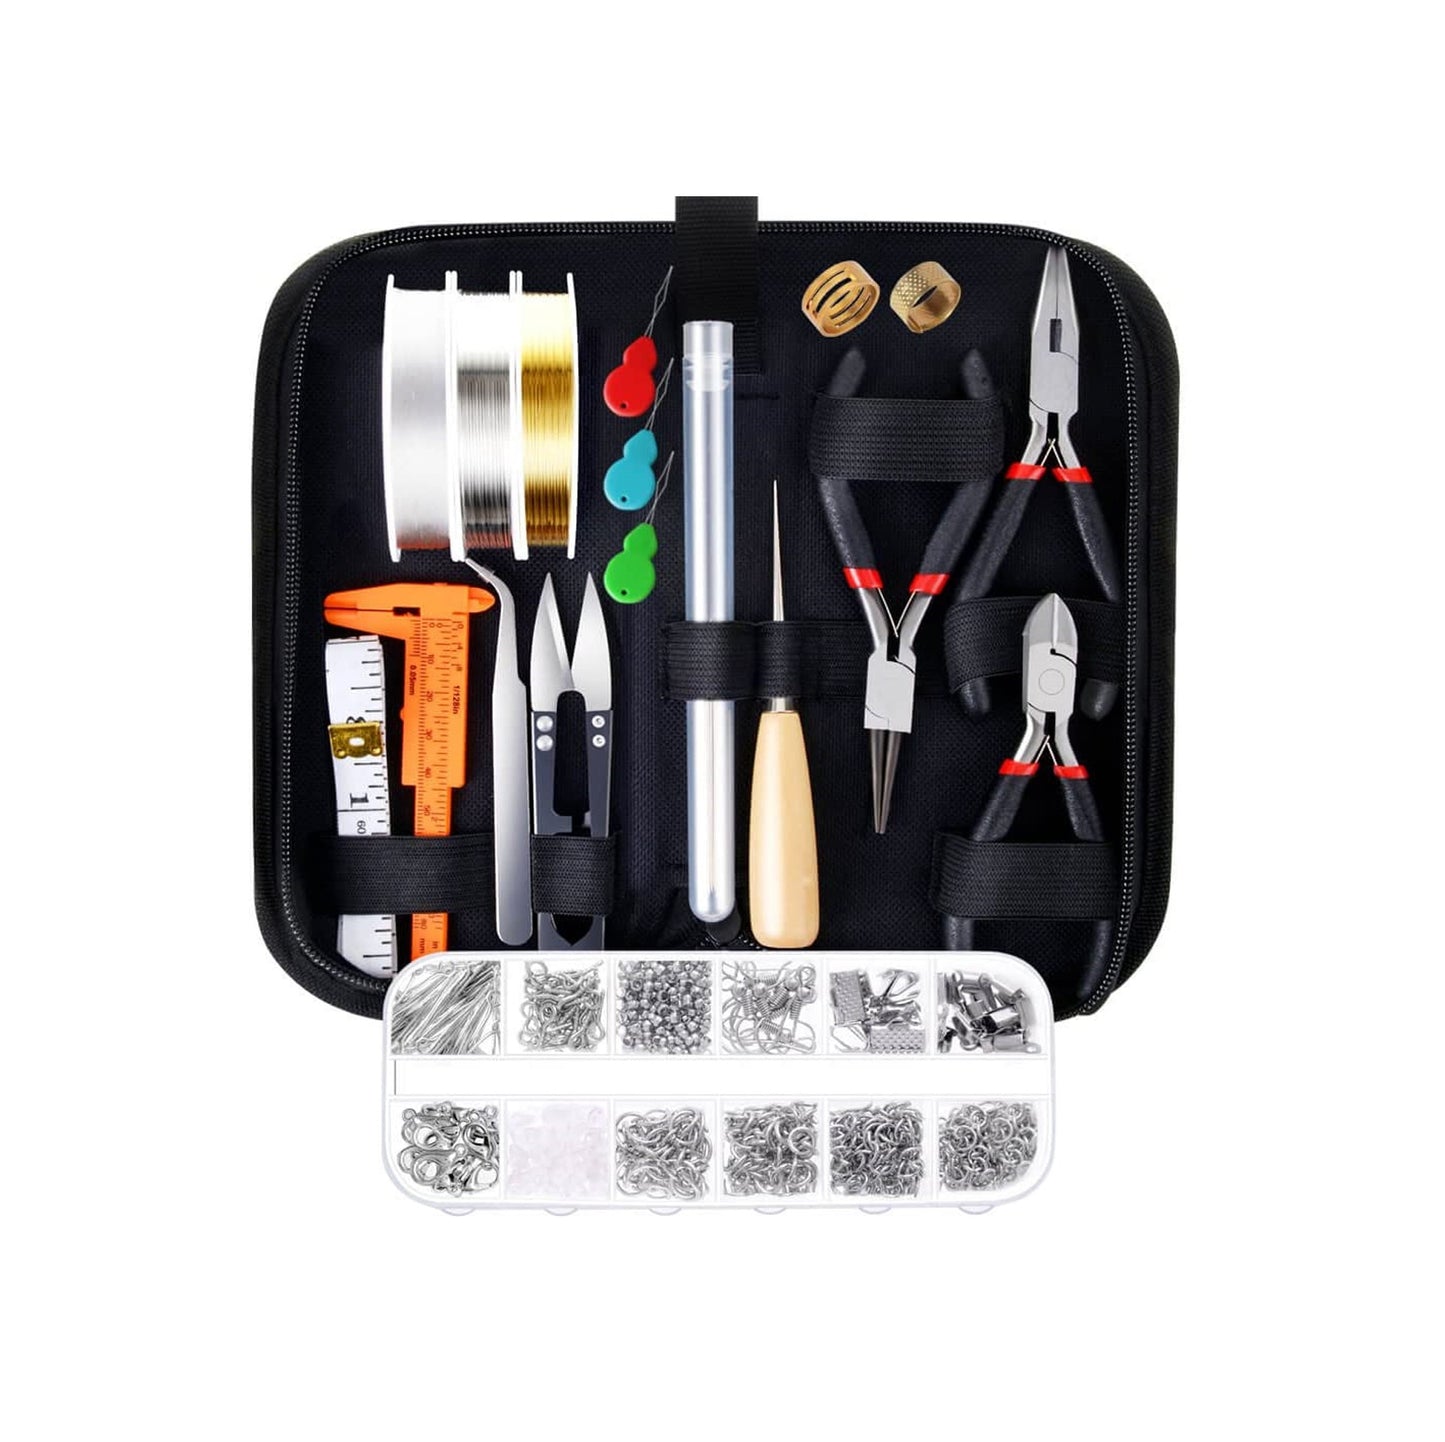 Jewelry Making Kit - Jewelry Pliers - Findings - Wire and Tools - Over 850pcs